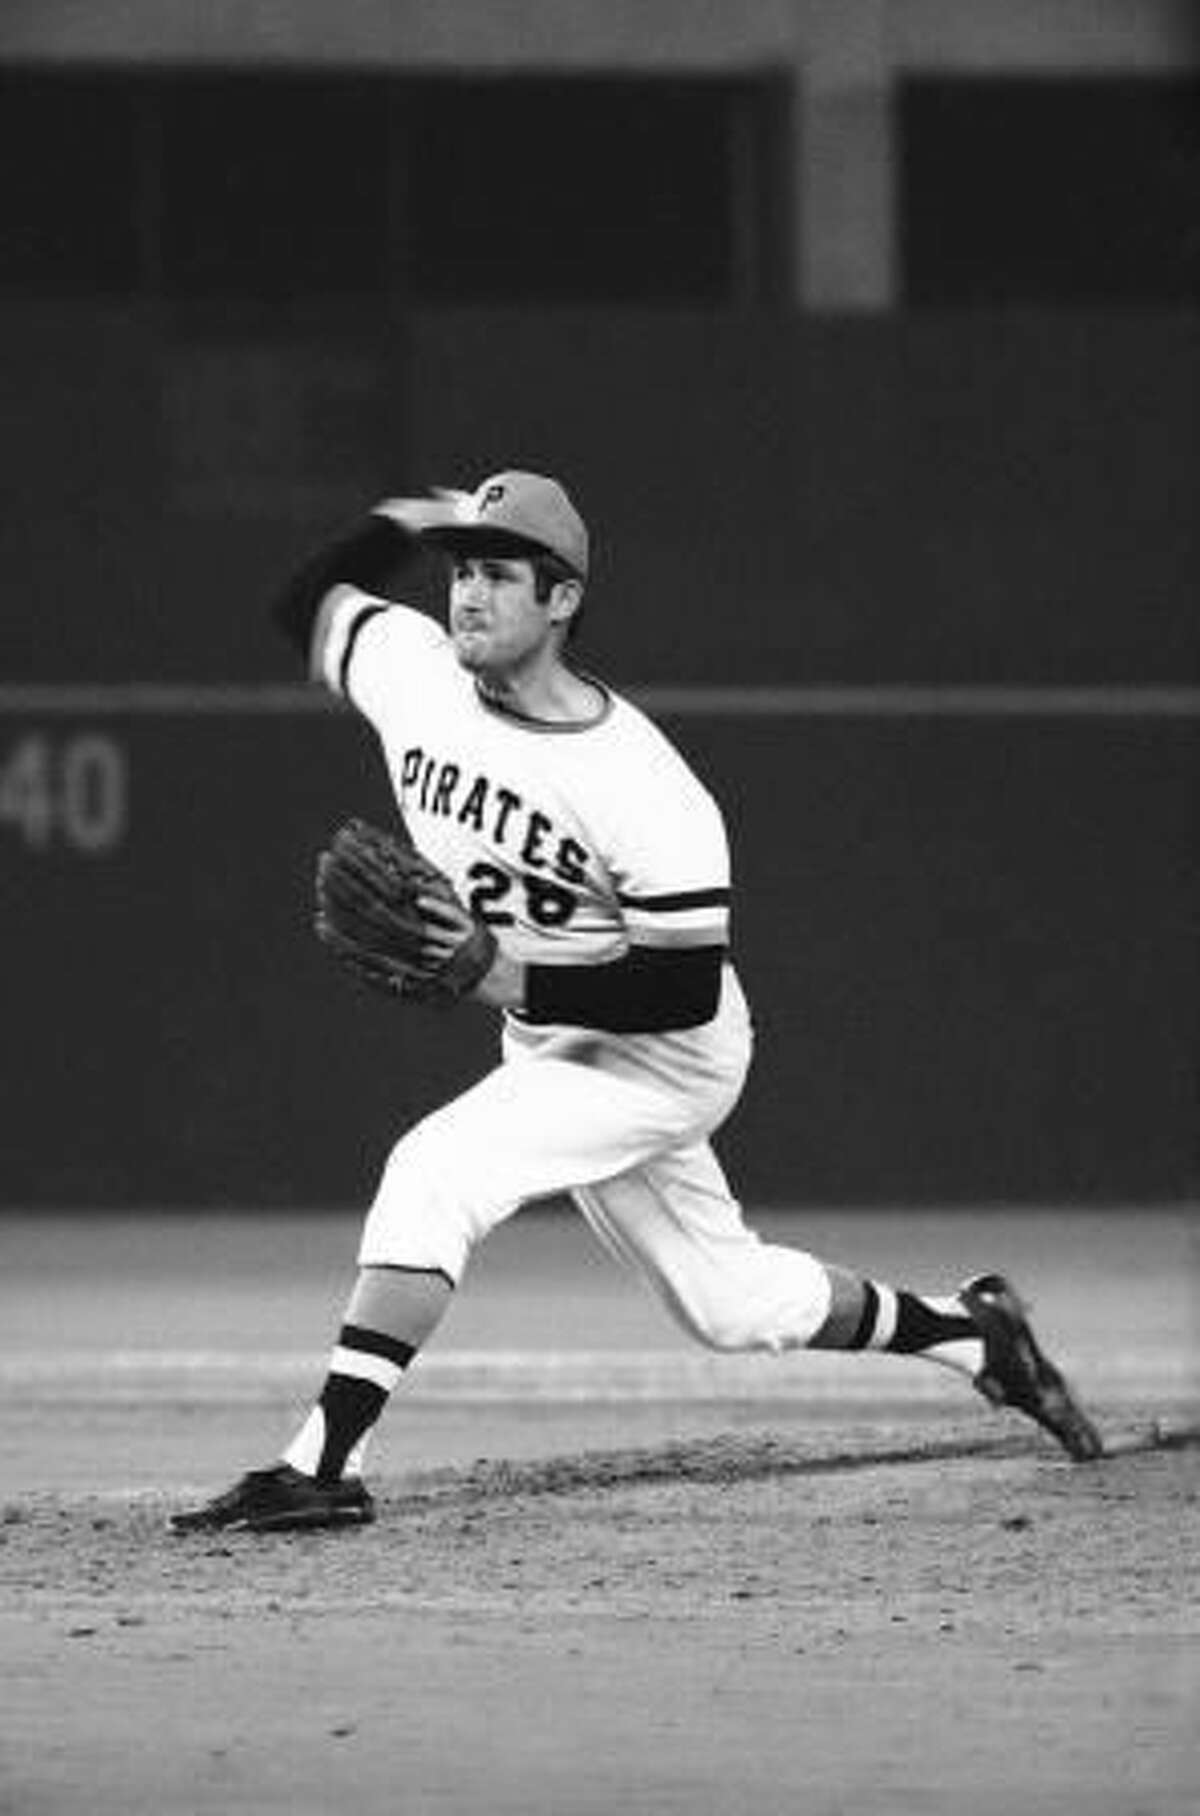 Pirates legends recall days at new 'home